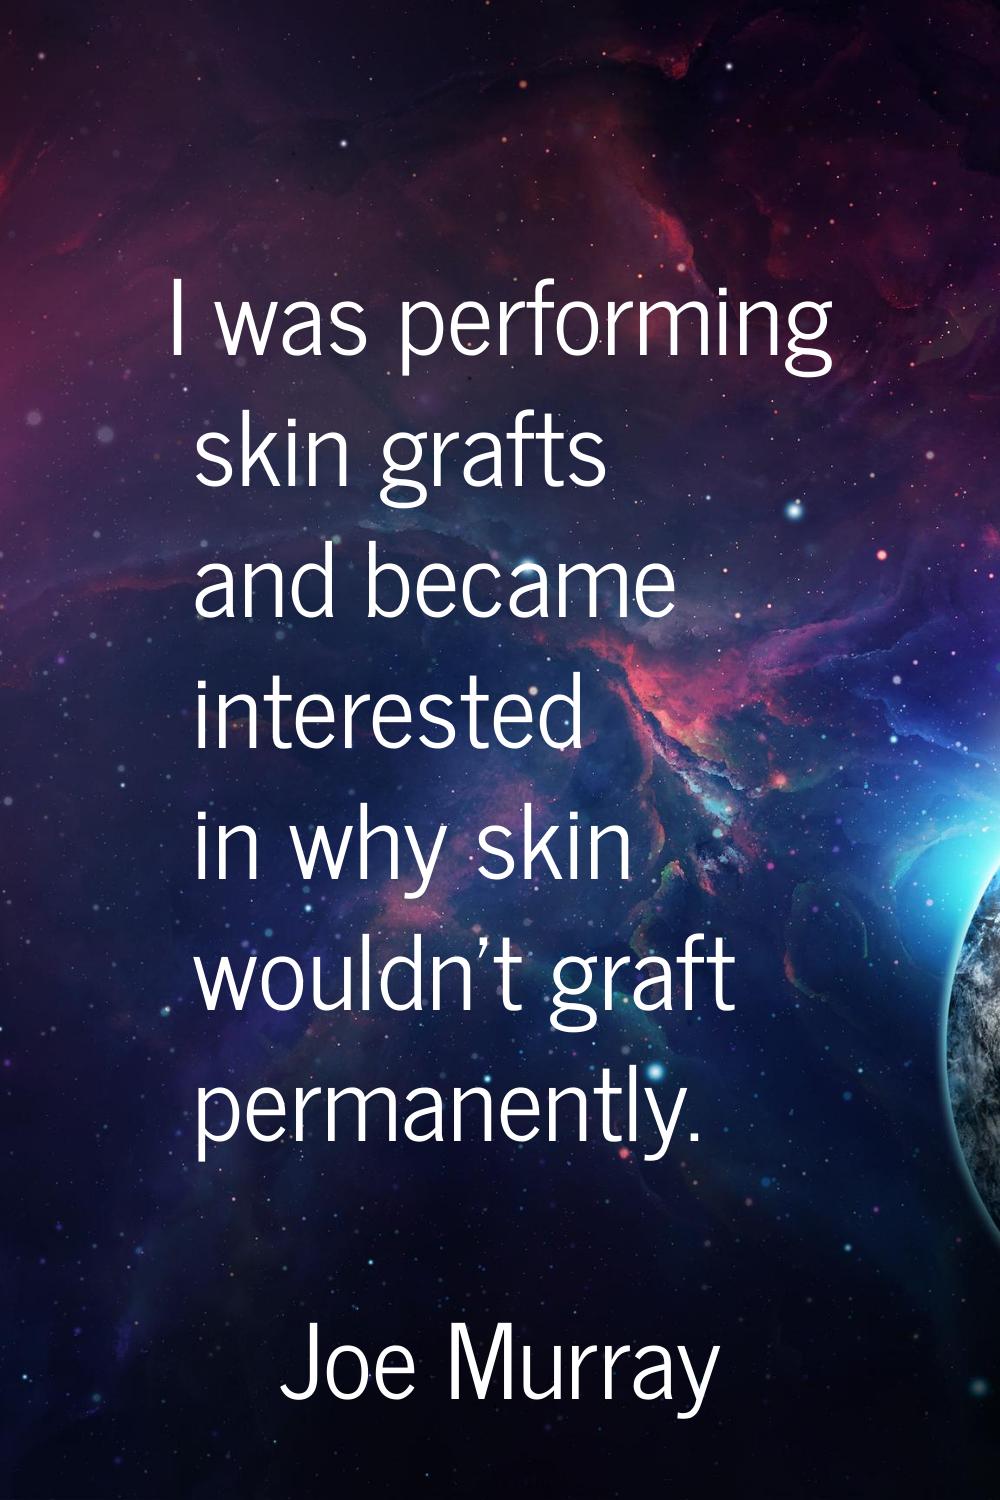 I was performing skin grafts and became interested in why skin wouldn't graft permanently.